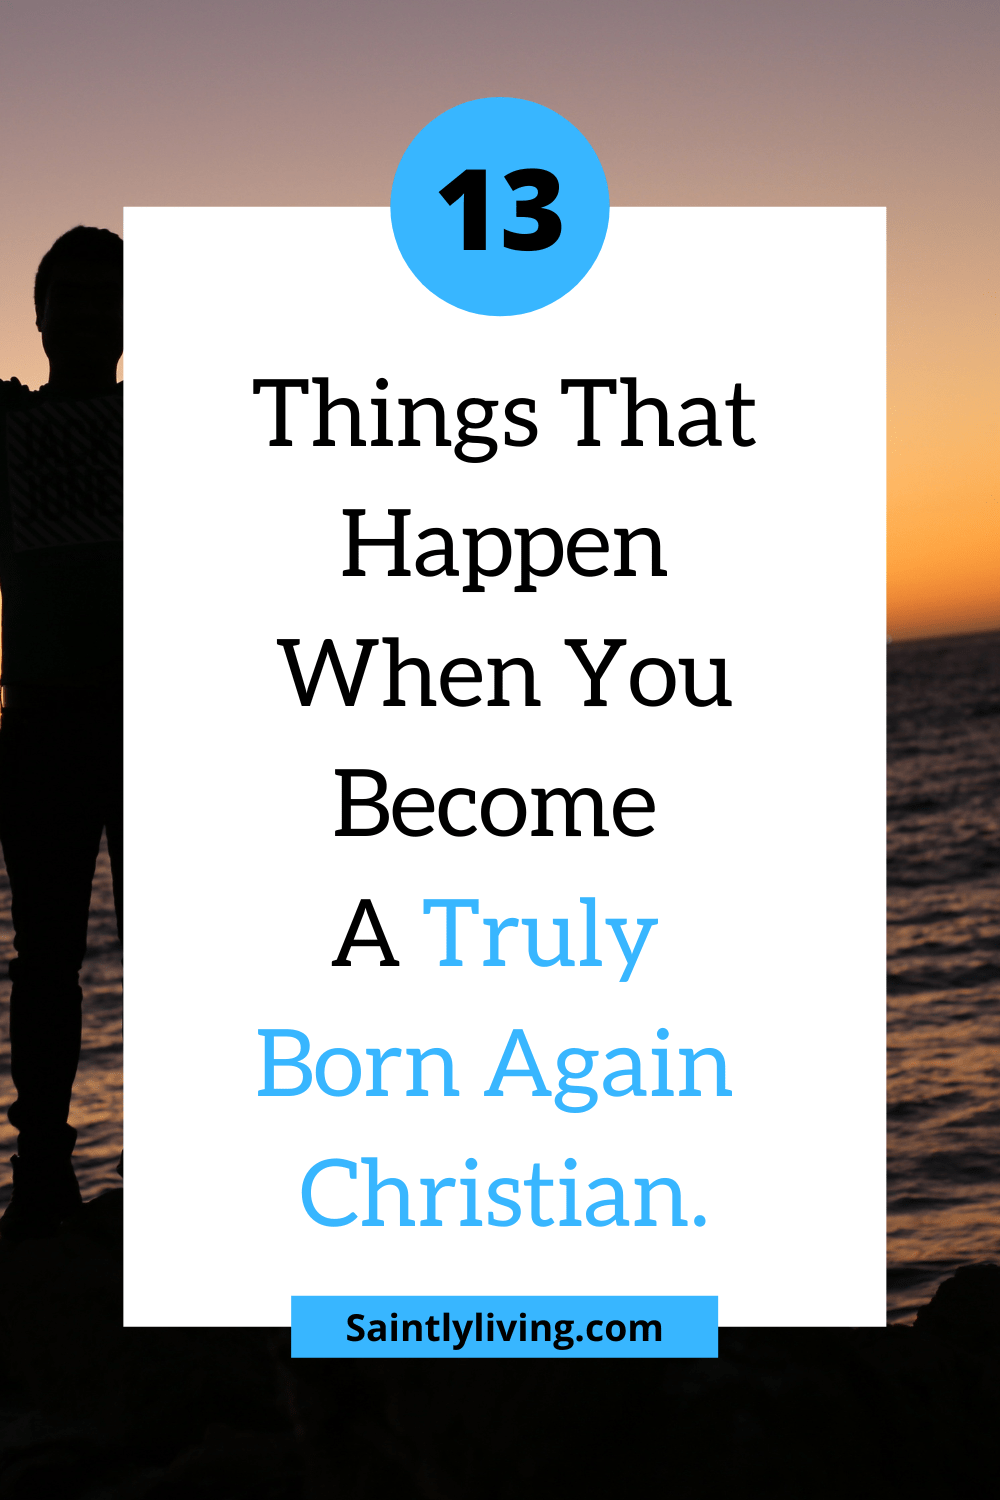  things that happen when you become born again